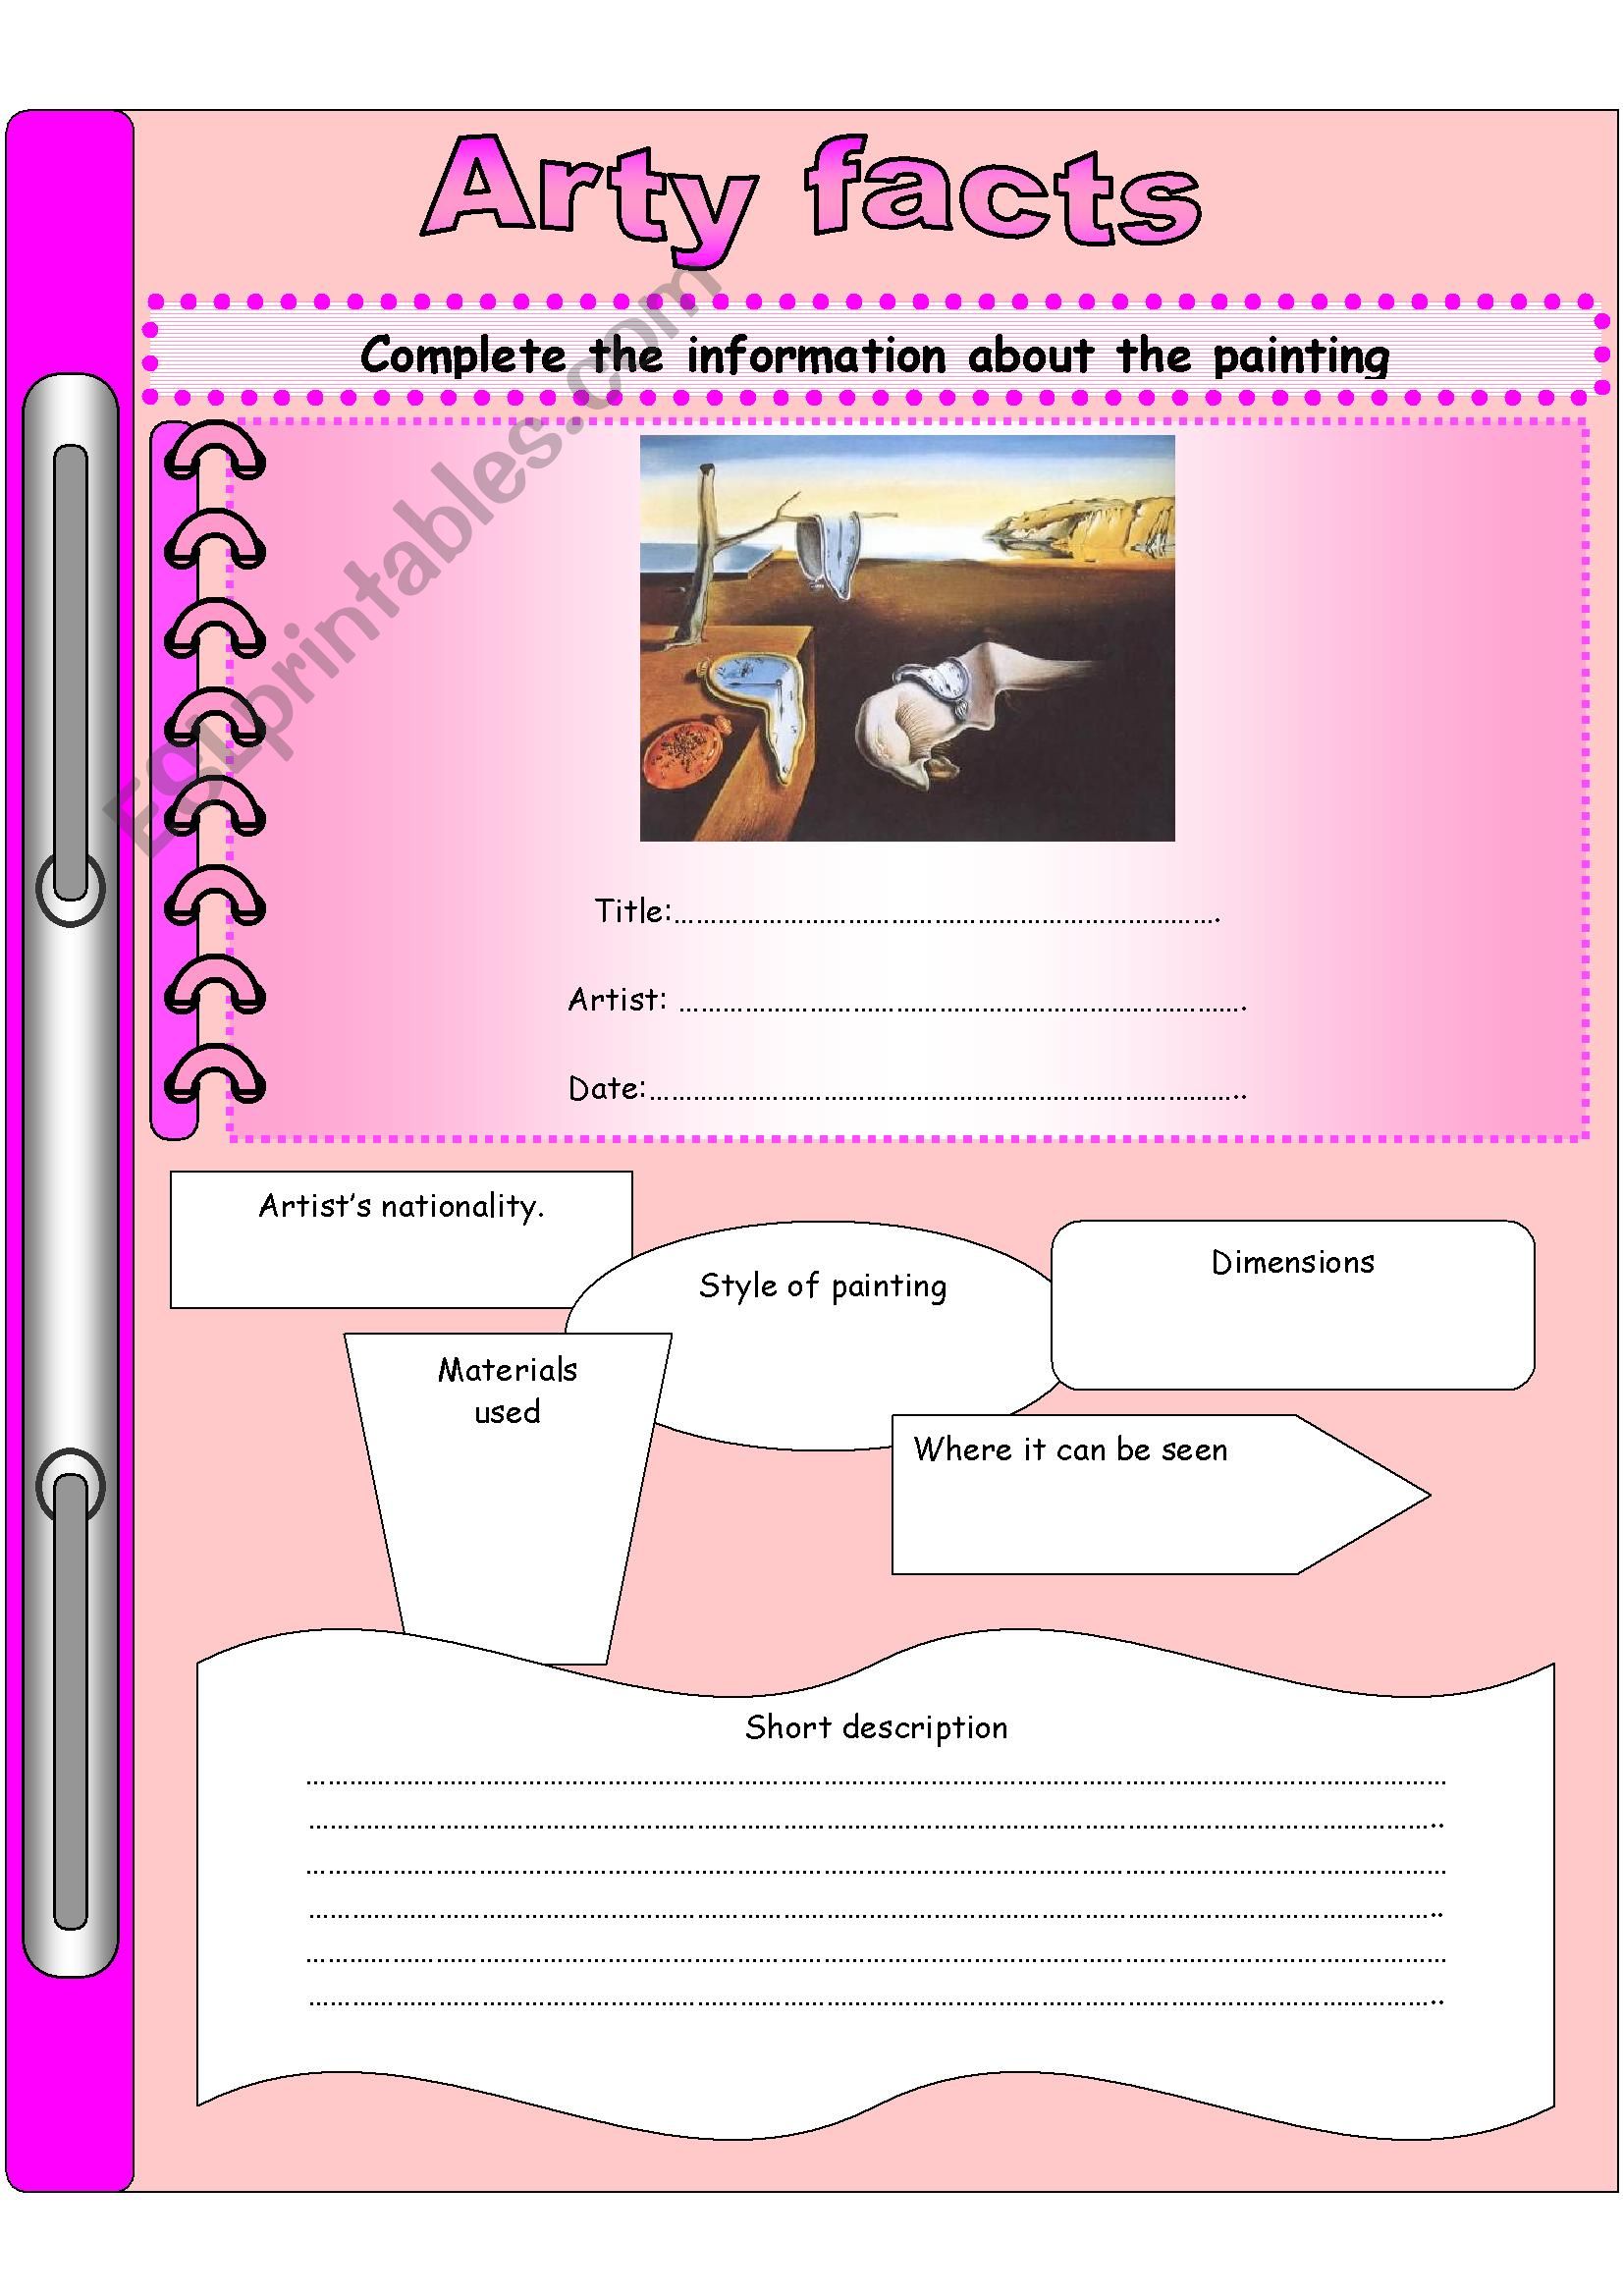 ARTY FACTS worksheet